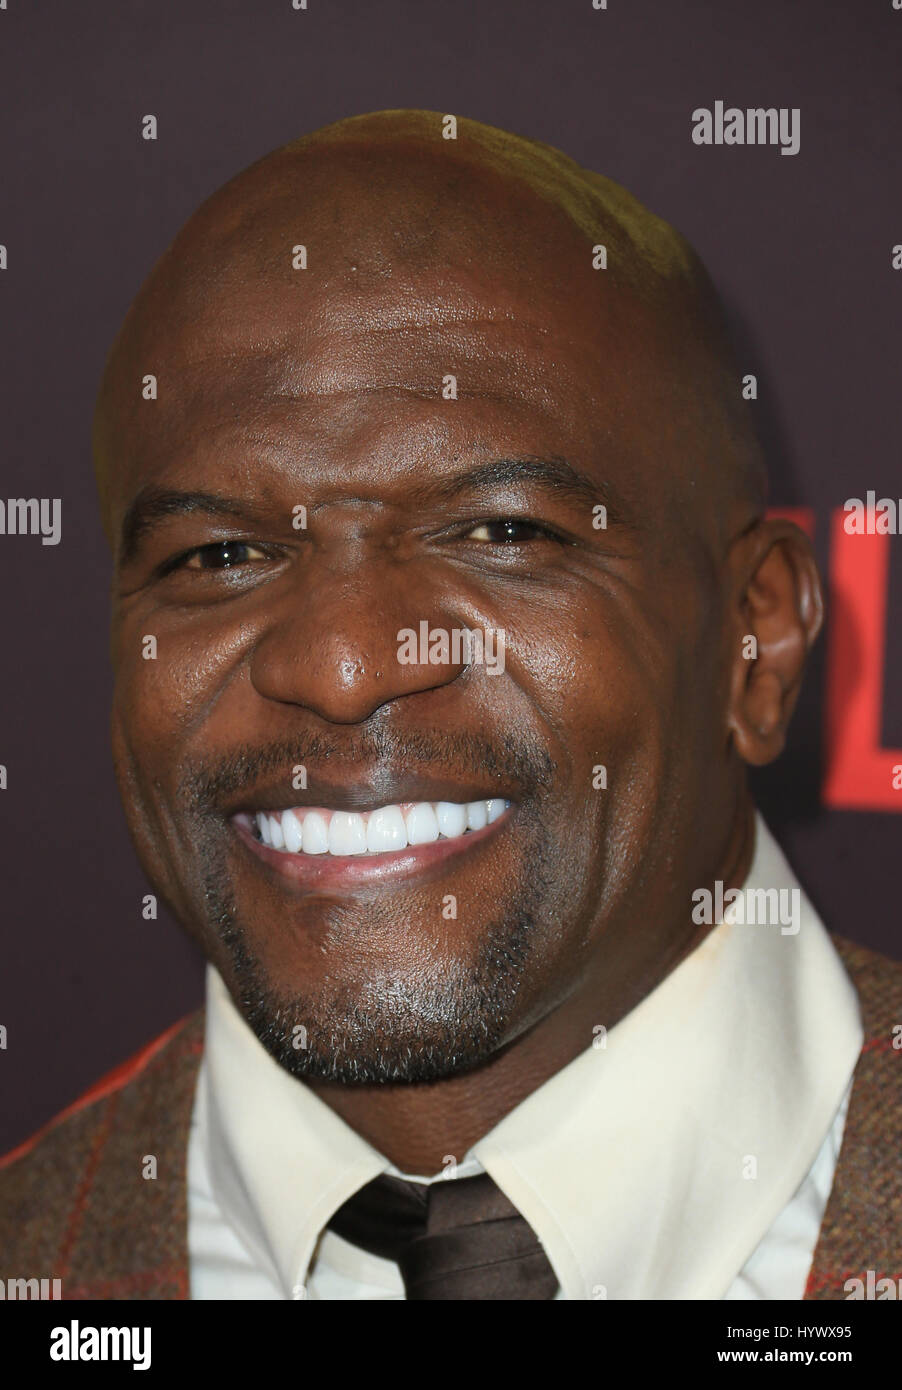 Hollywood, USA. 06th Apr, 2017. Terry Crews, at Premiere of Netflix's 'Sandy Wexler at The ArcLight Cinemas Cinerama Dome in California on April 06, 2017. Credit: Fs/Media Punch/Alamy Live News Stock Photo